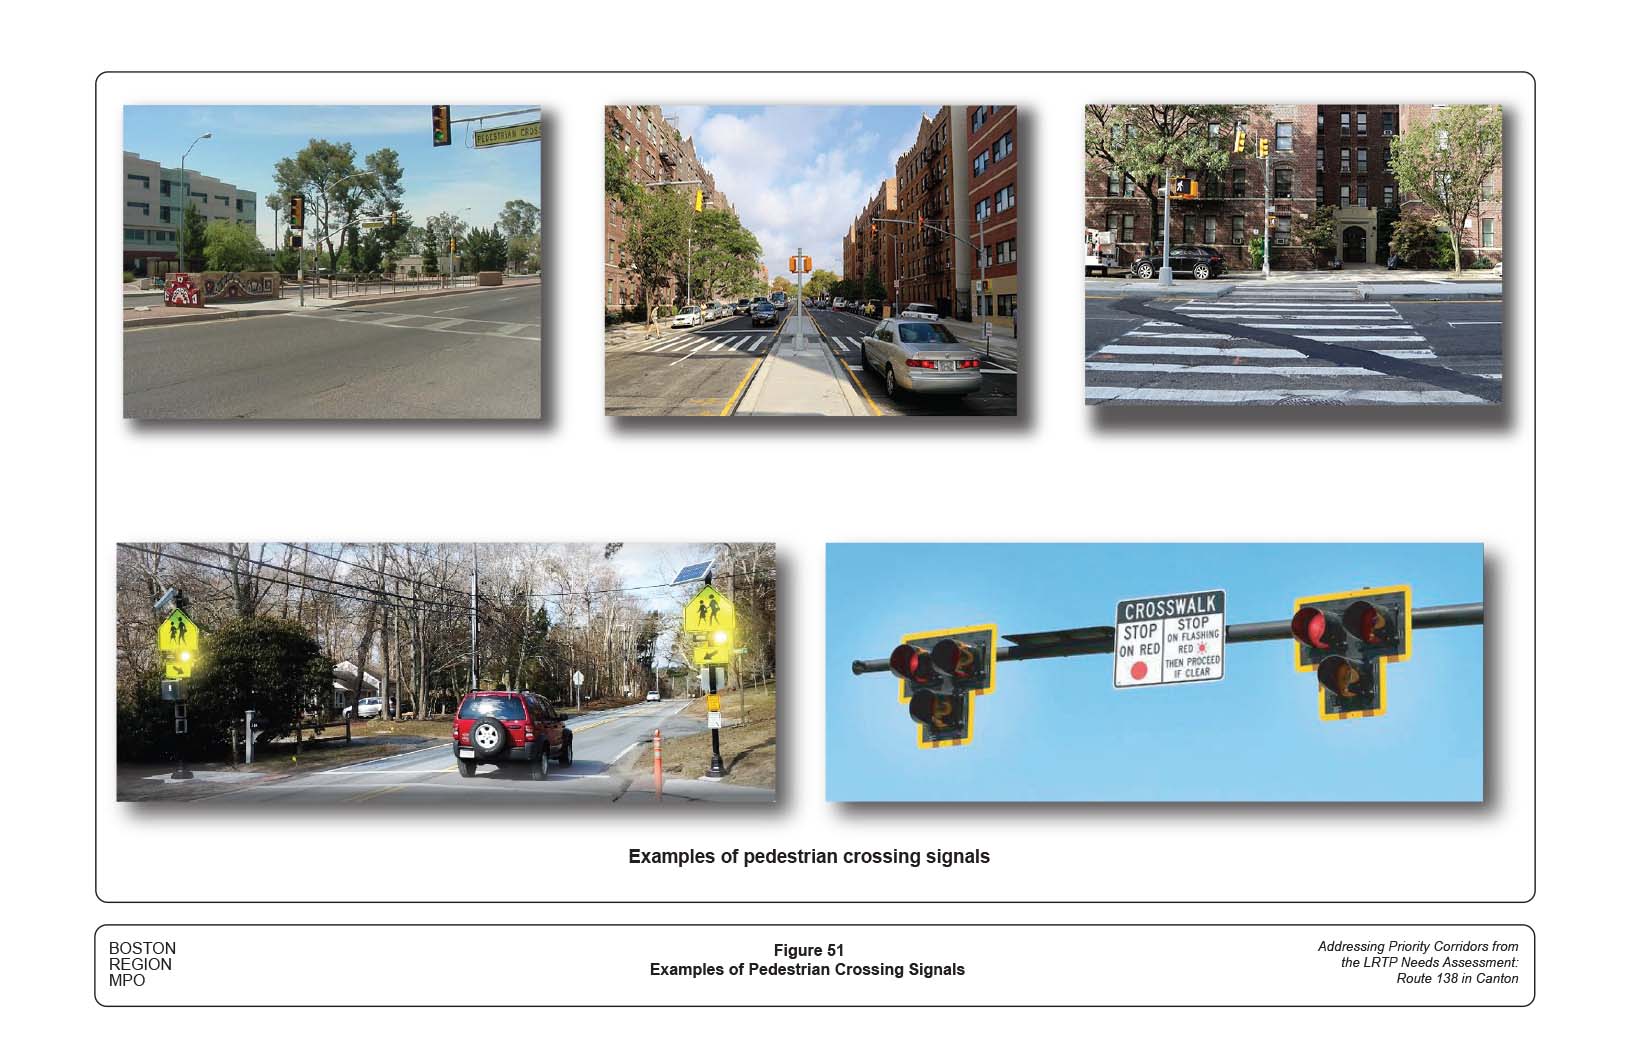 Figure 51 contains five photographs showing examples of pedestrian crossing signals.